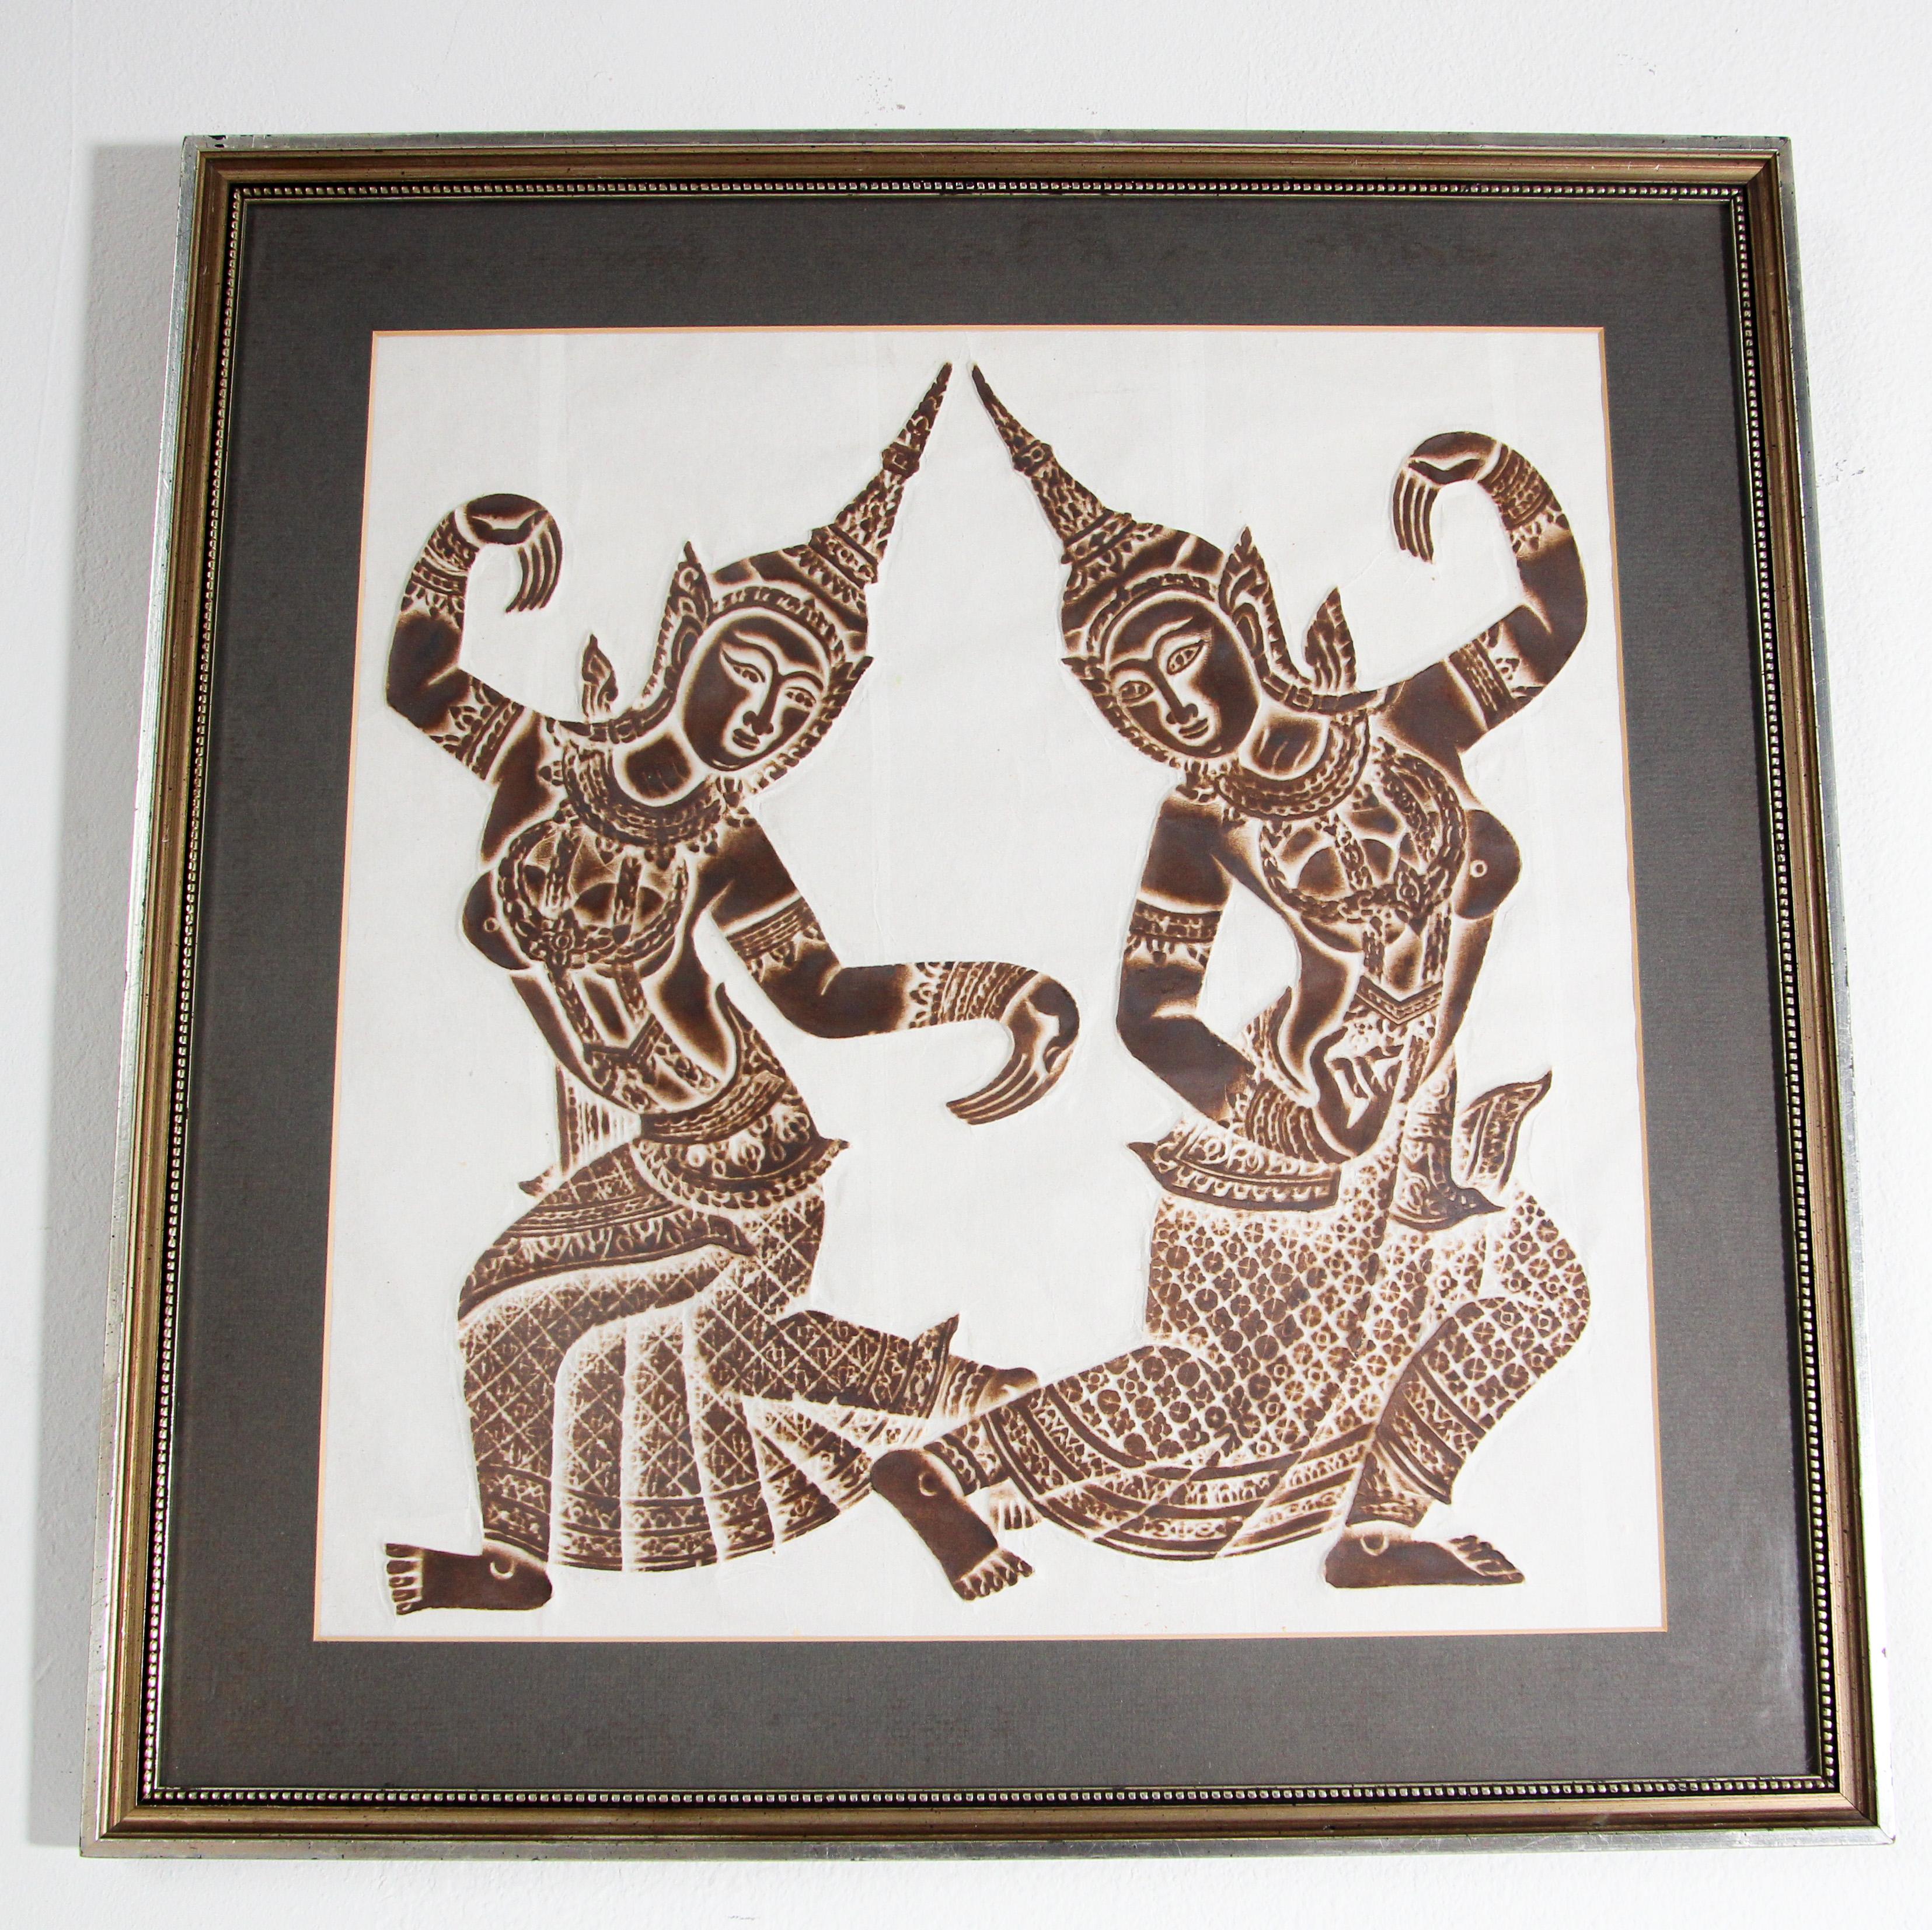 Vintage Thai Temple charcoal rubbing. Hand crafted temple scenes at the Wat Pho temple located in Phra Nakhon district in Bangkok Thailand depicting the Thai literary story of Ramakien (Ramakean), the Thai adaptation of Ramayana. 
Rare Thai Temple